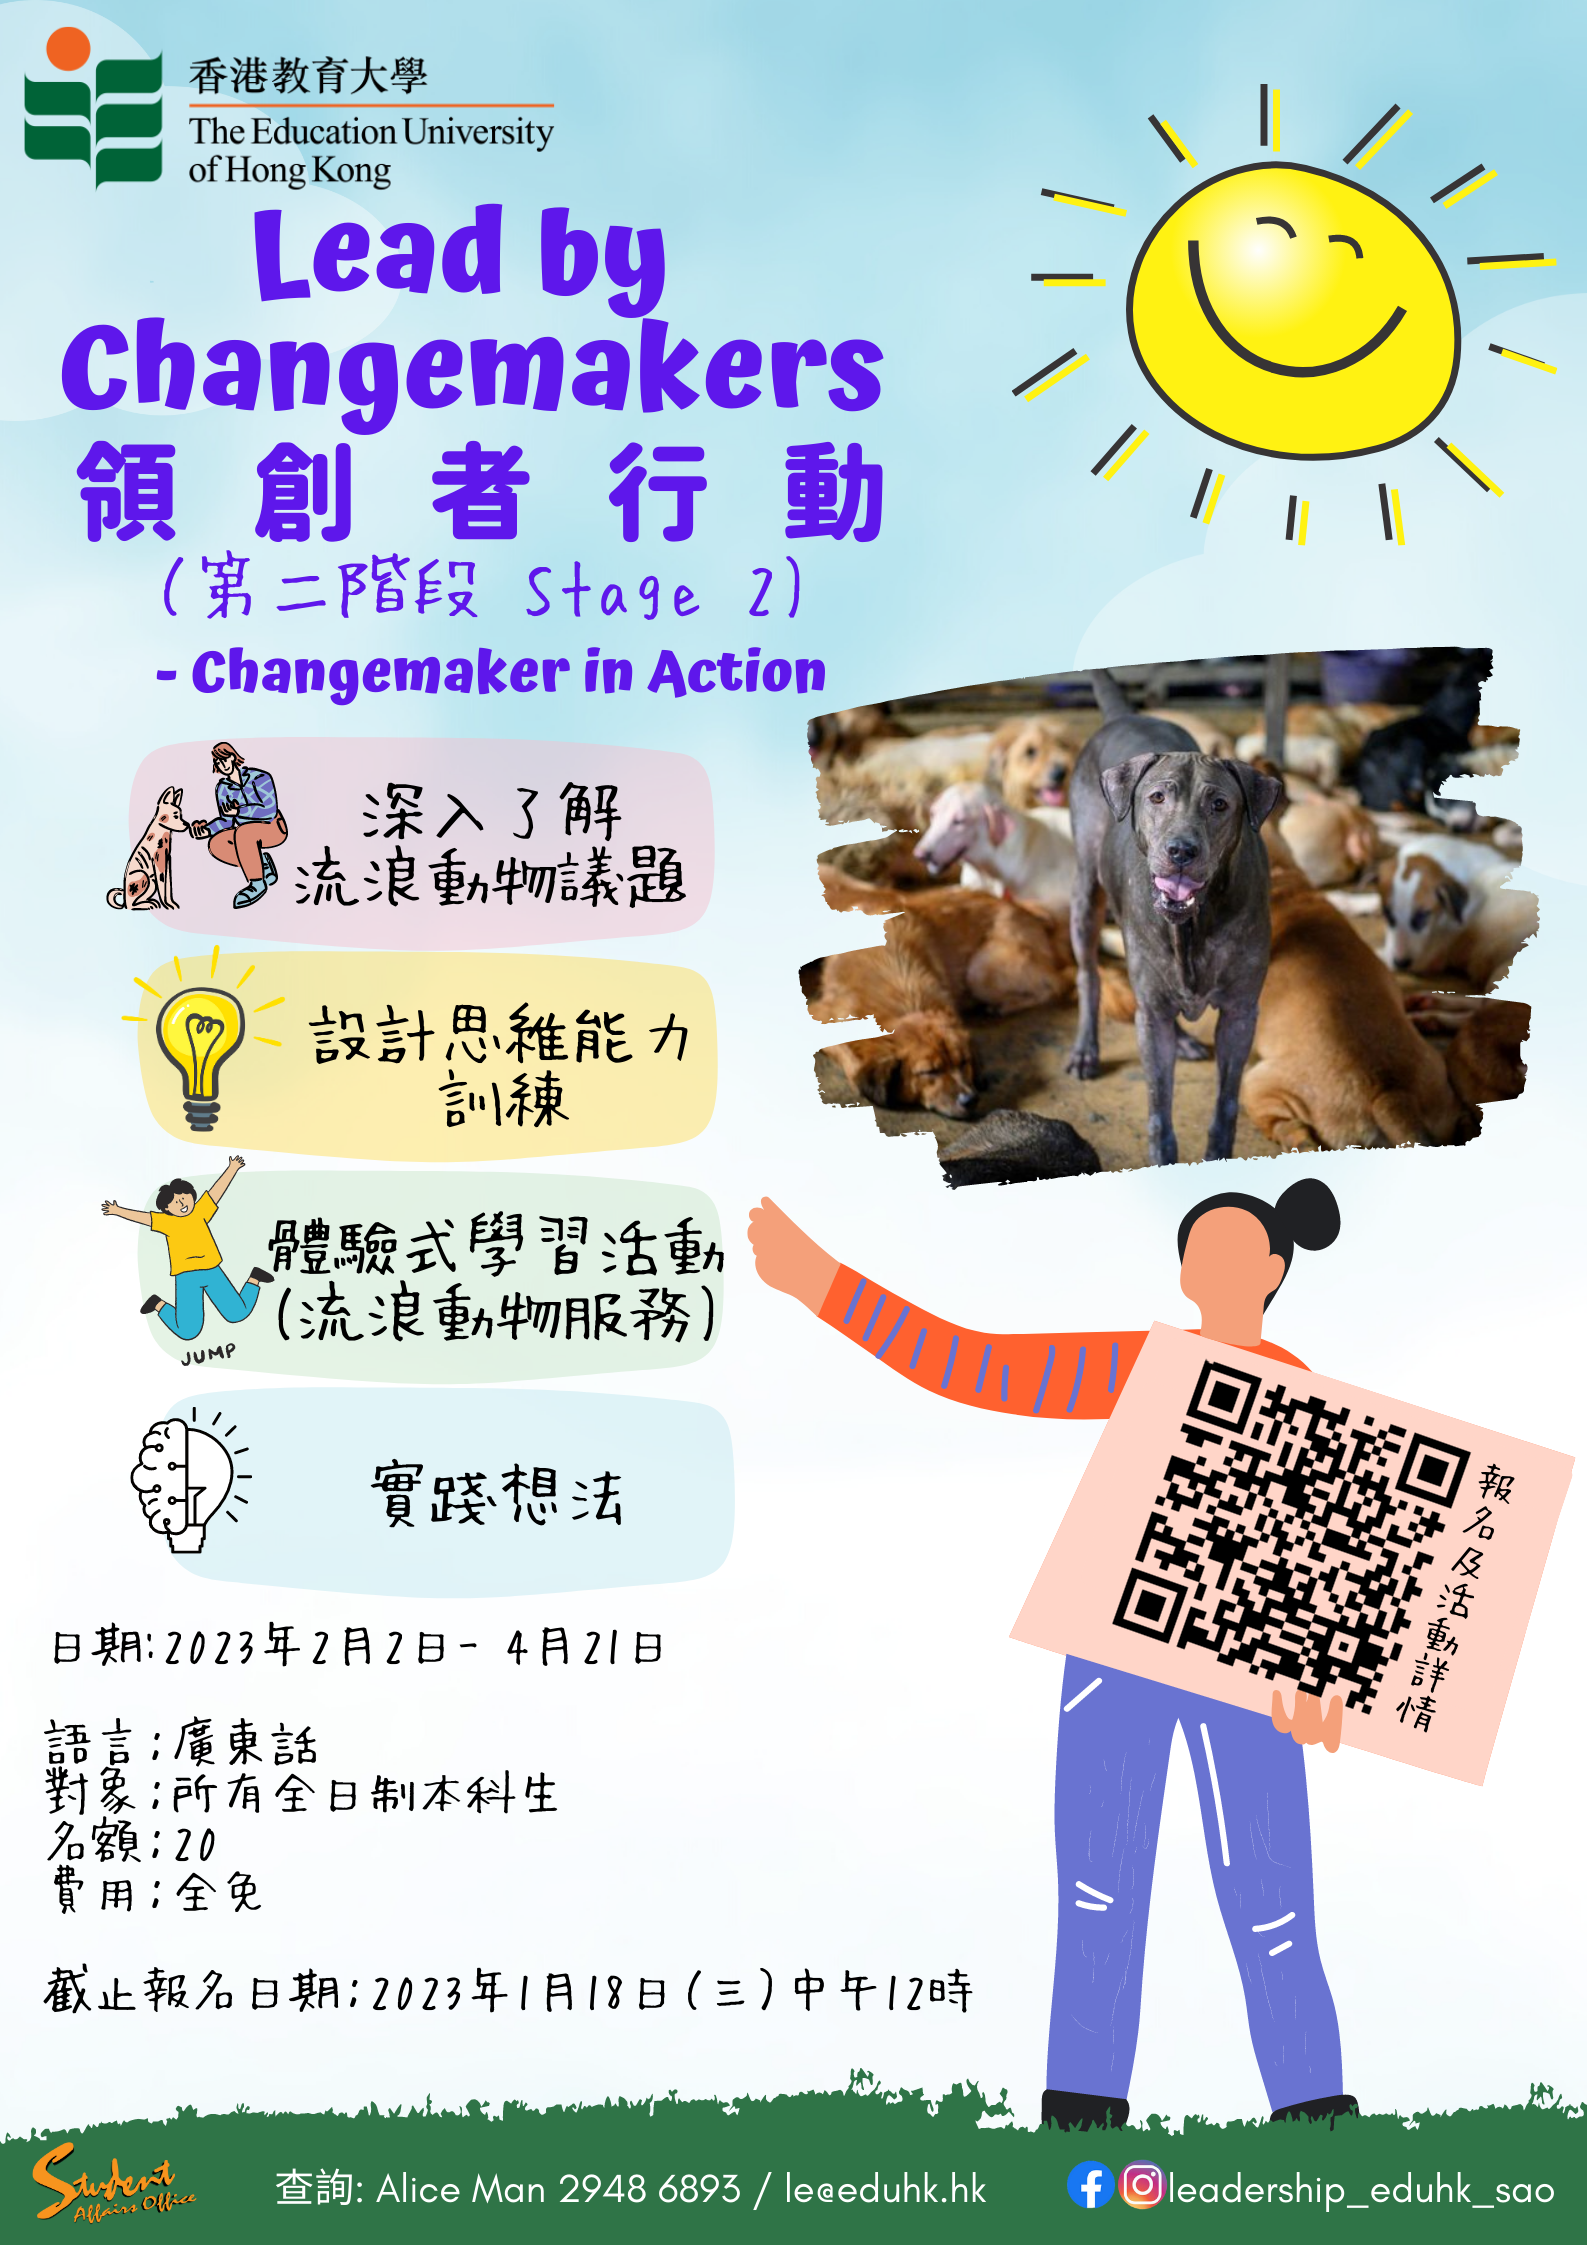 Self Photos / Files - Lead by Changemakers (Satge 2)